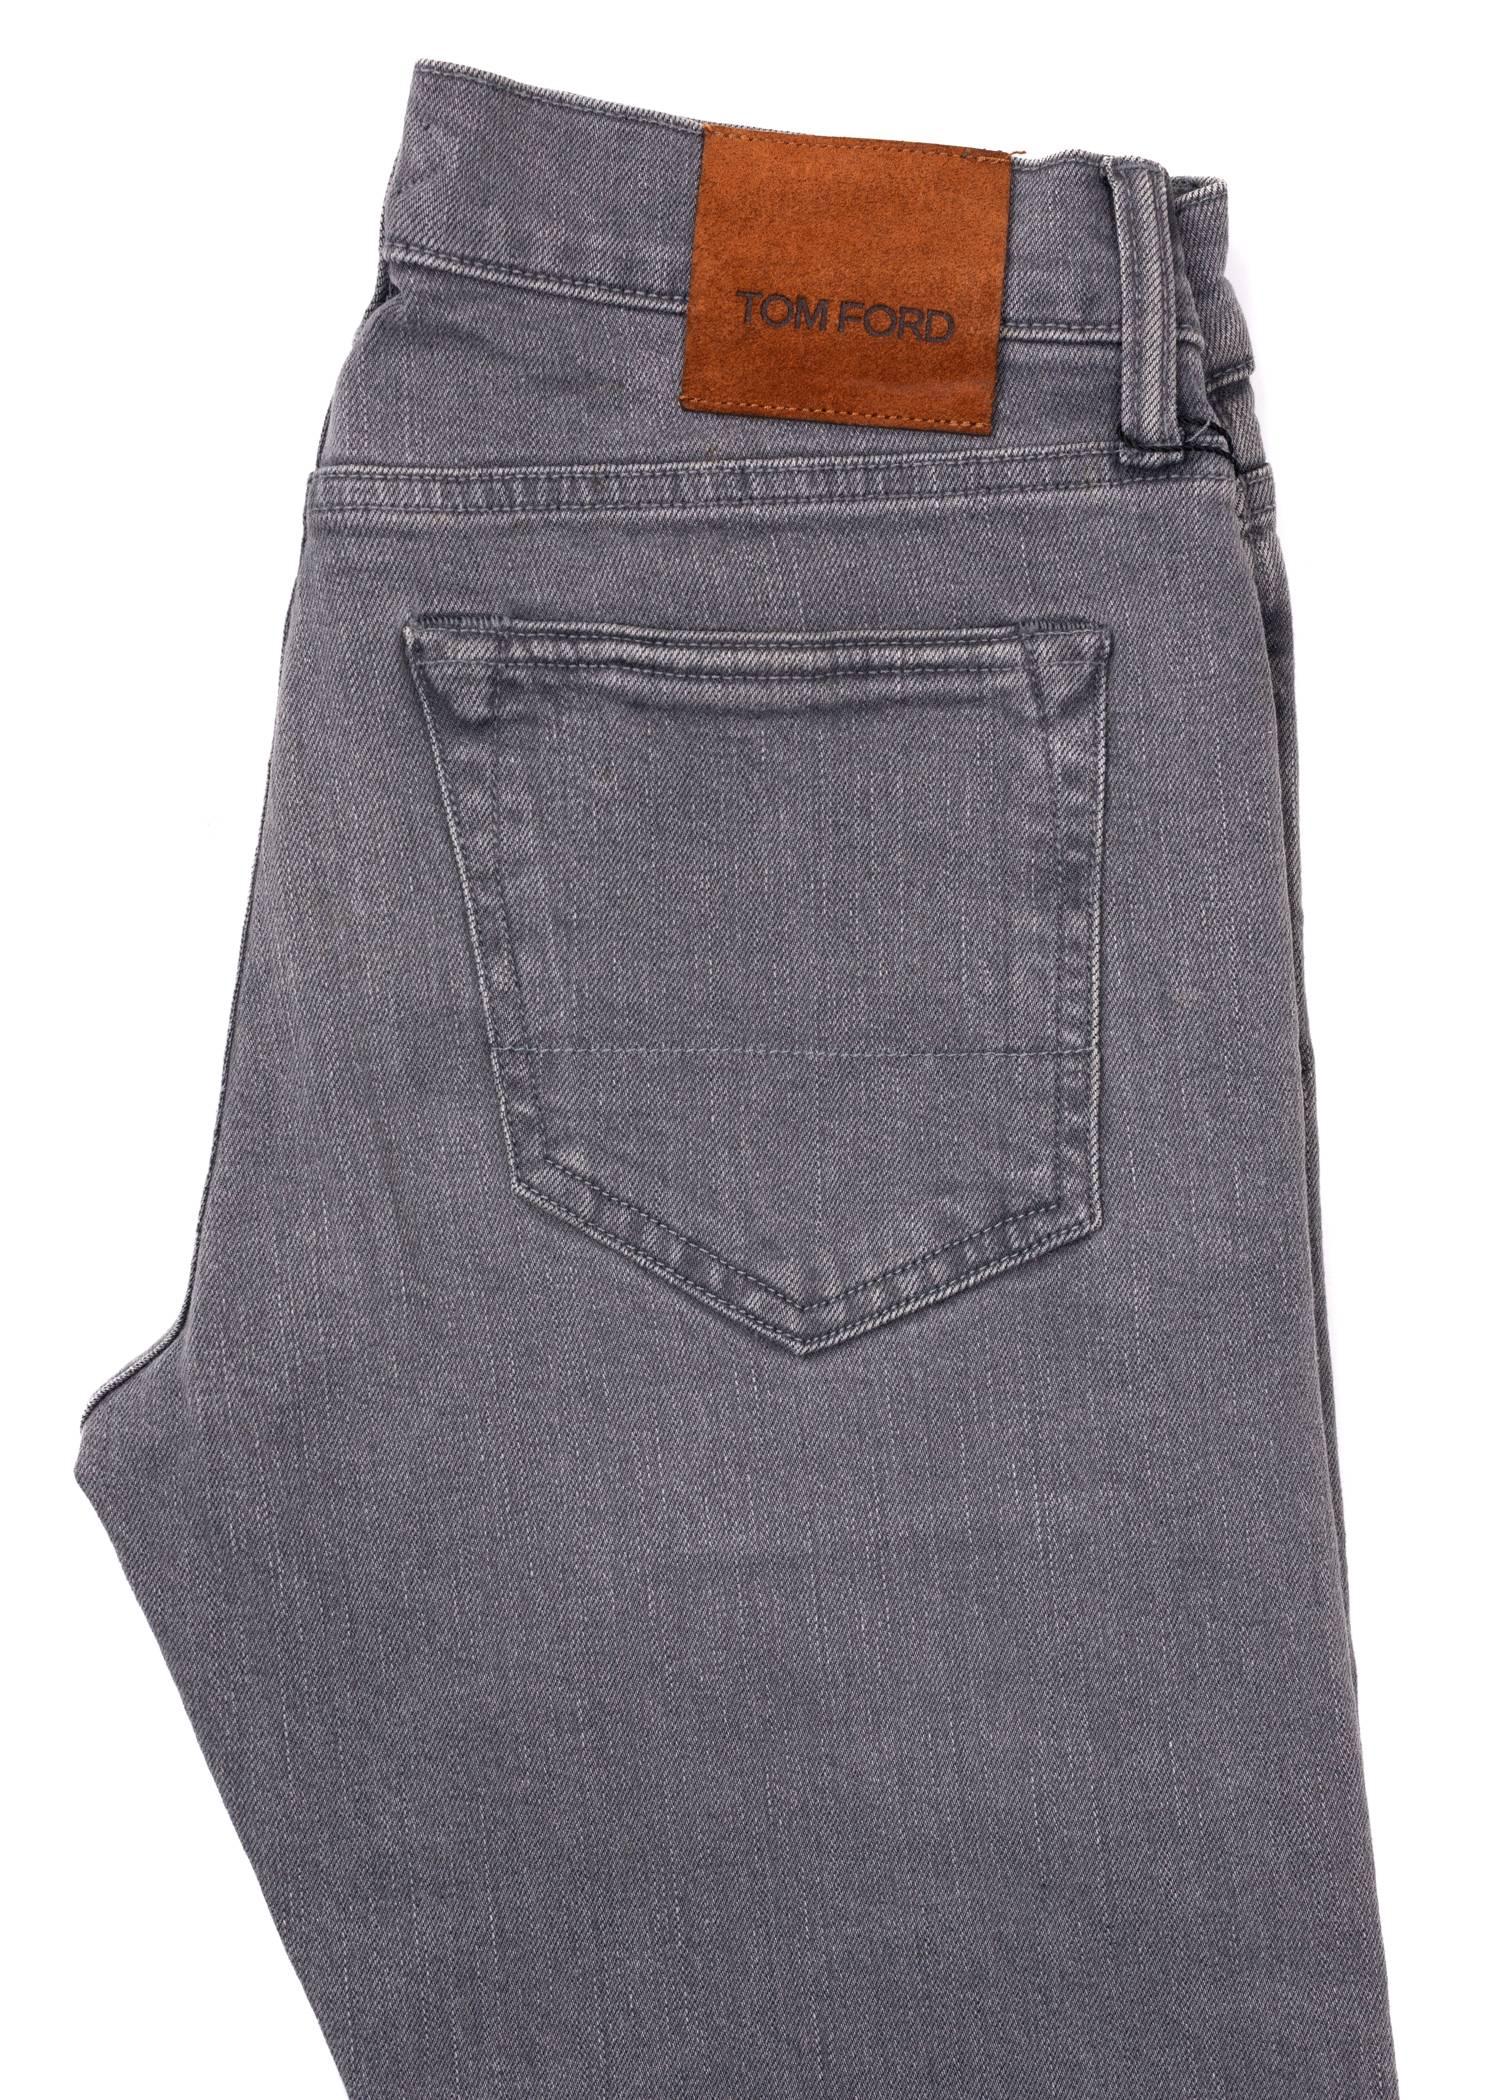 Tom Ford Selvedge Denim Jeans Medium Grey Wash Size 33 Slim Fit Model   In New Condition In Brooklyn, NY